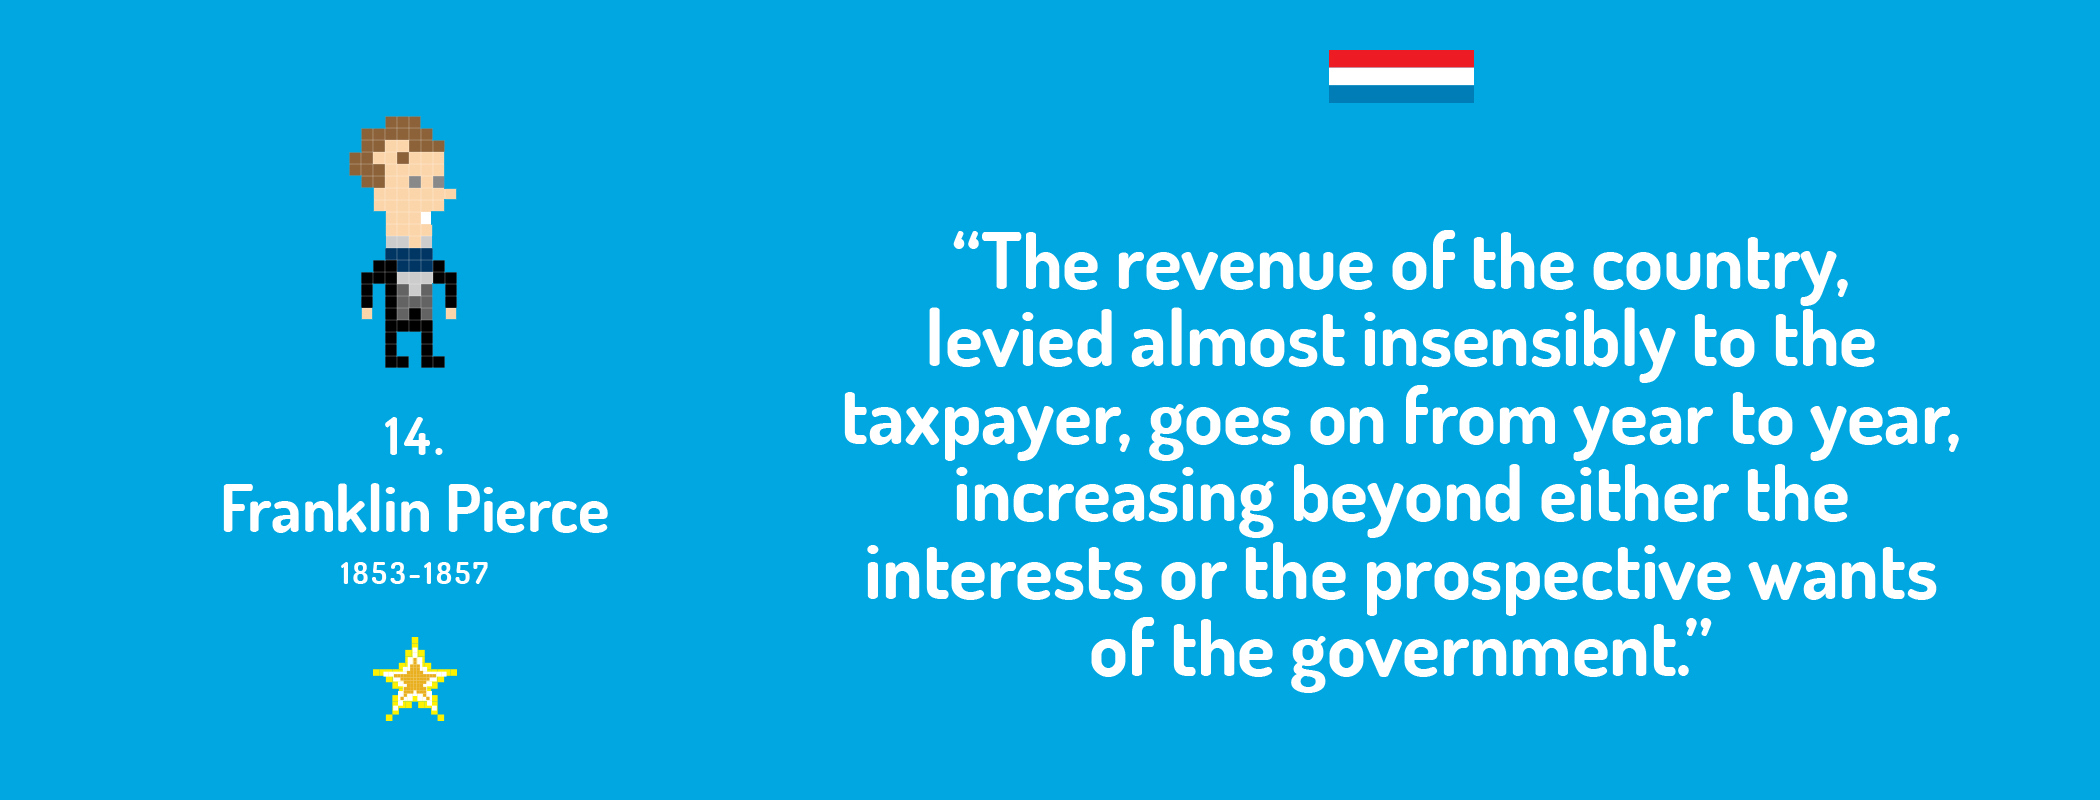 The revenue of the country, levied almost insensibly to the taxpayer, goes on from year to year, increasing beyond either the interests or the prospective wants of the government.